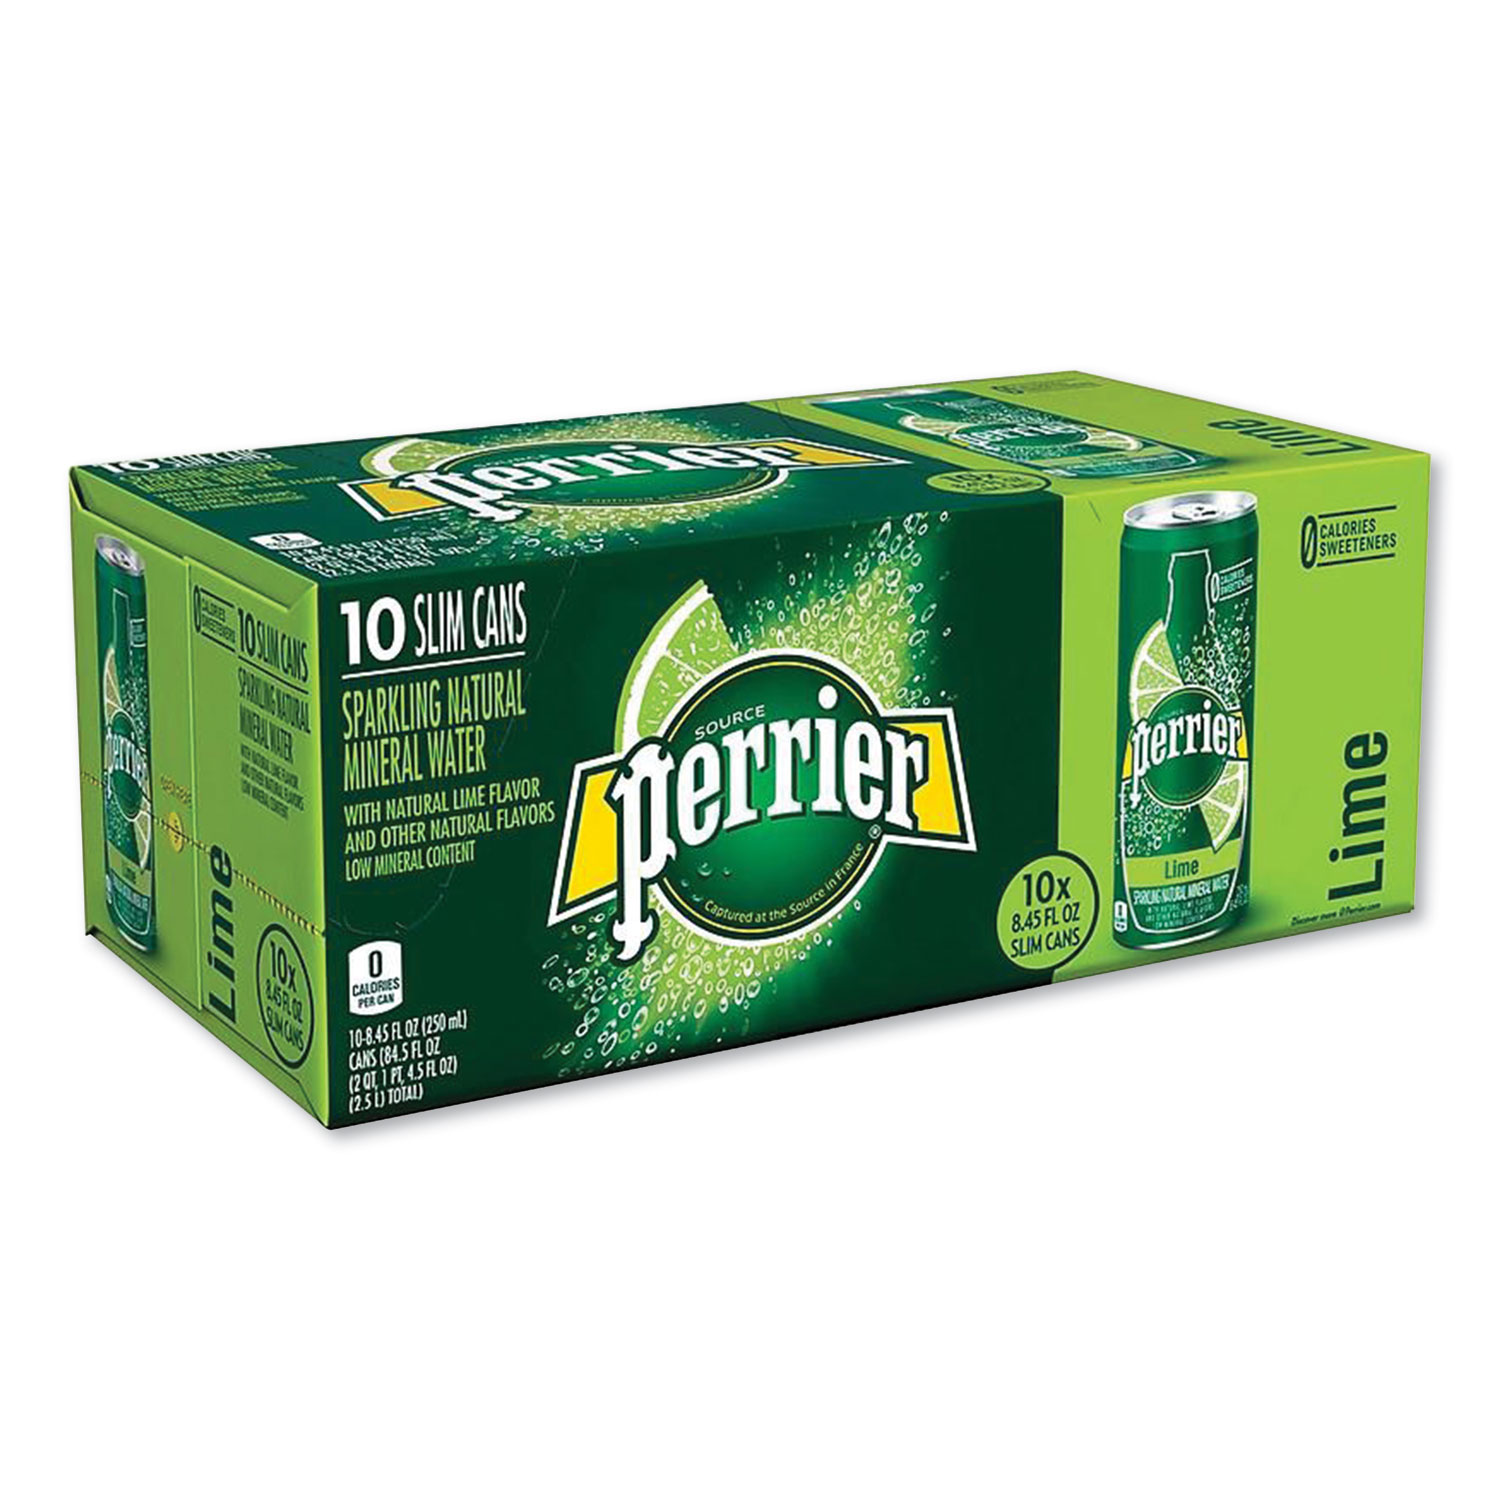 Perrier® Sparkling Natural Mineral Water, Lime, 8.45 oz Can, 10 Cans/Pack